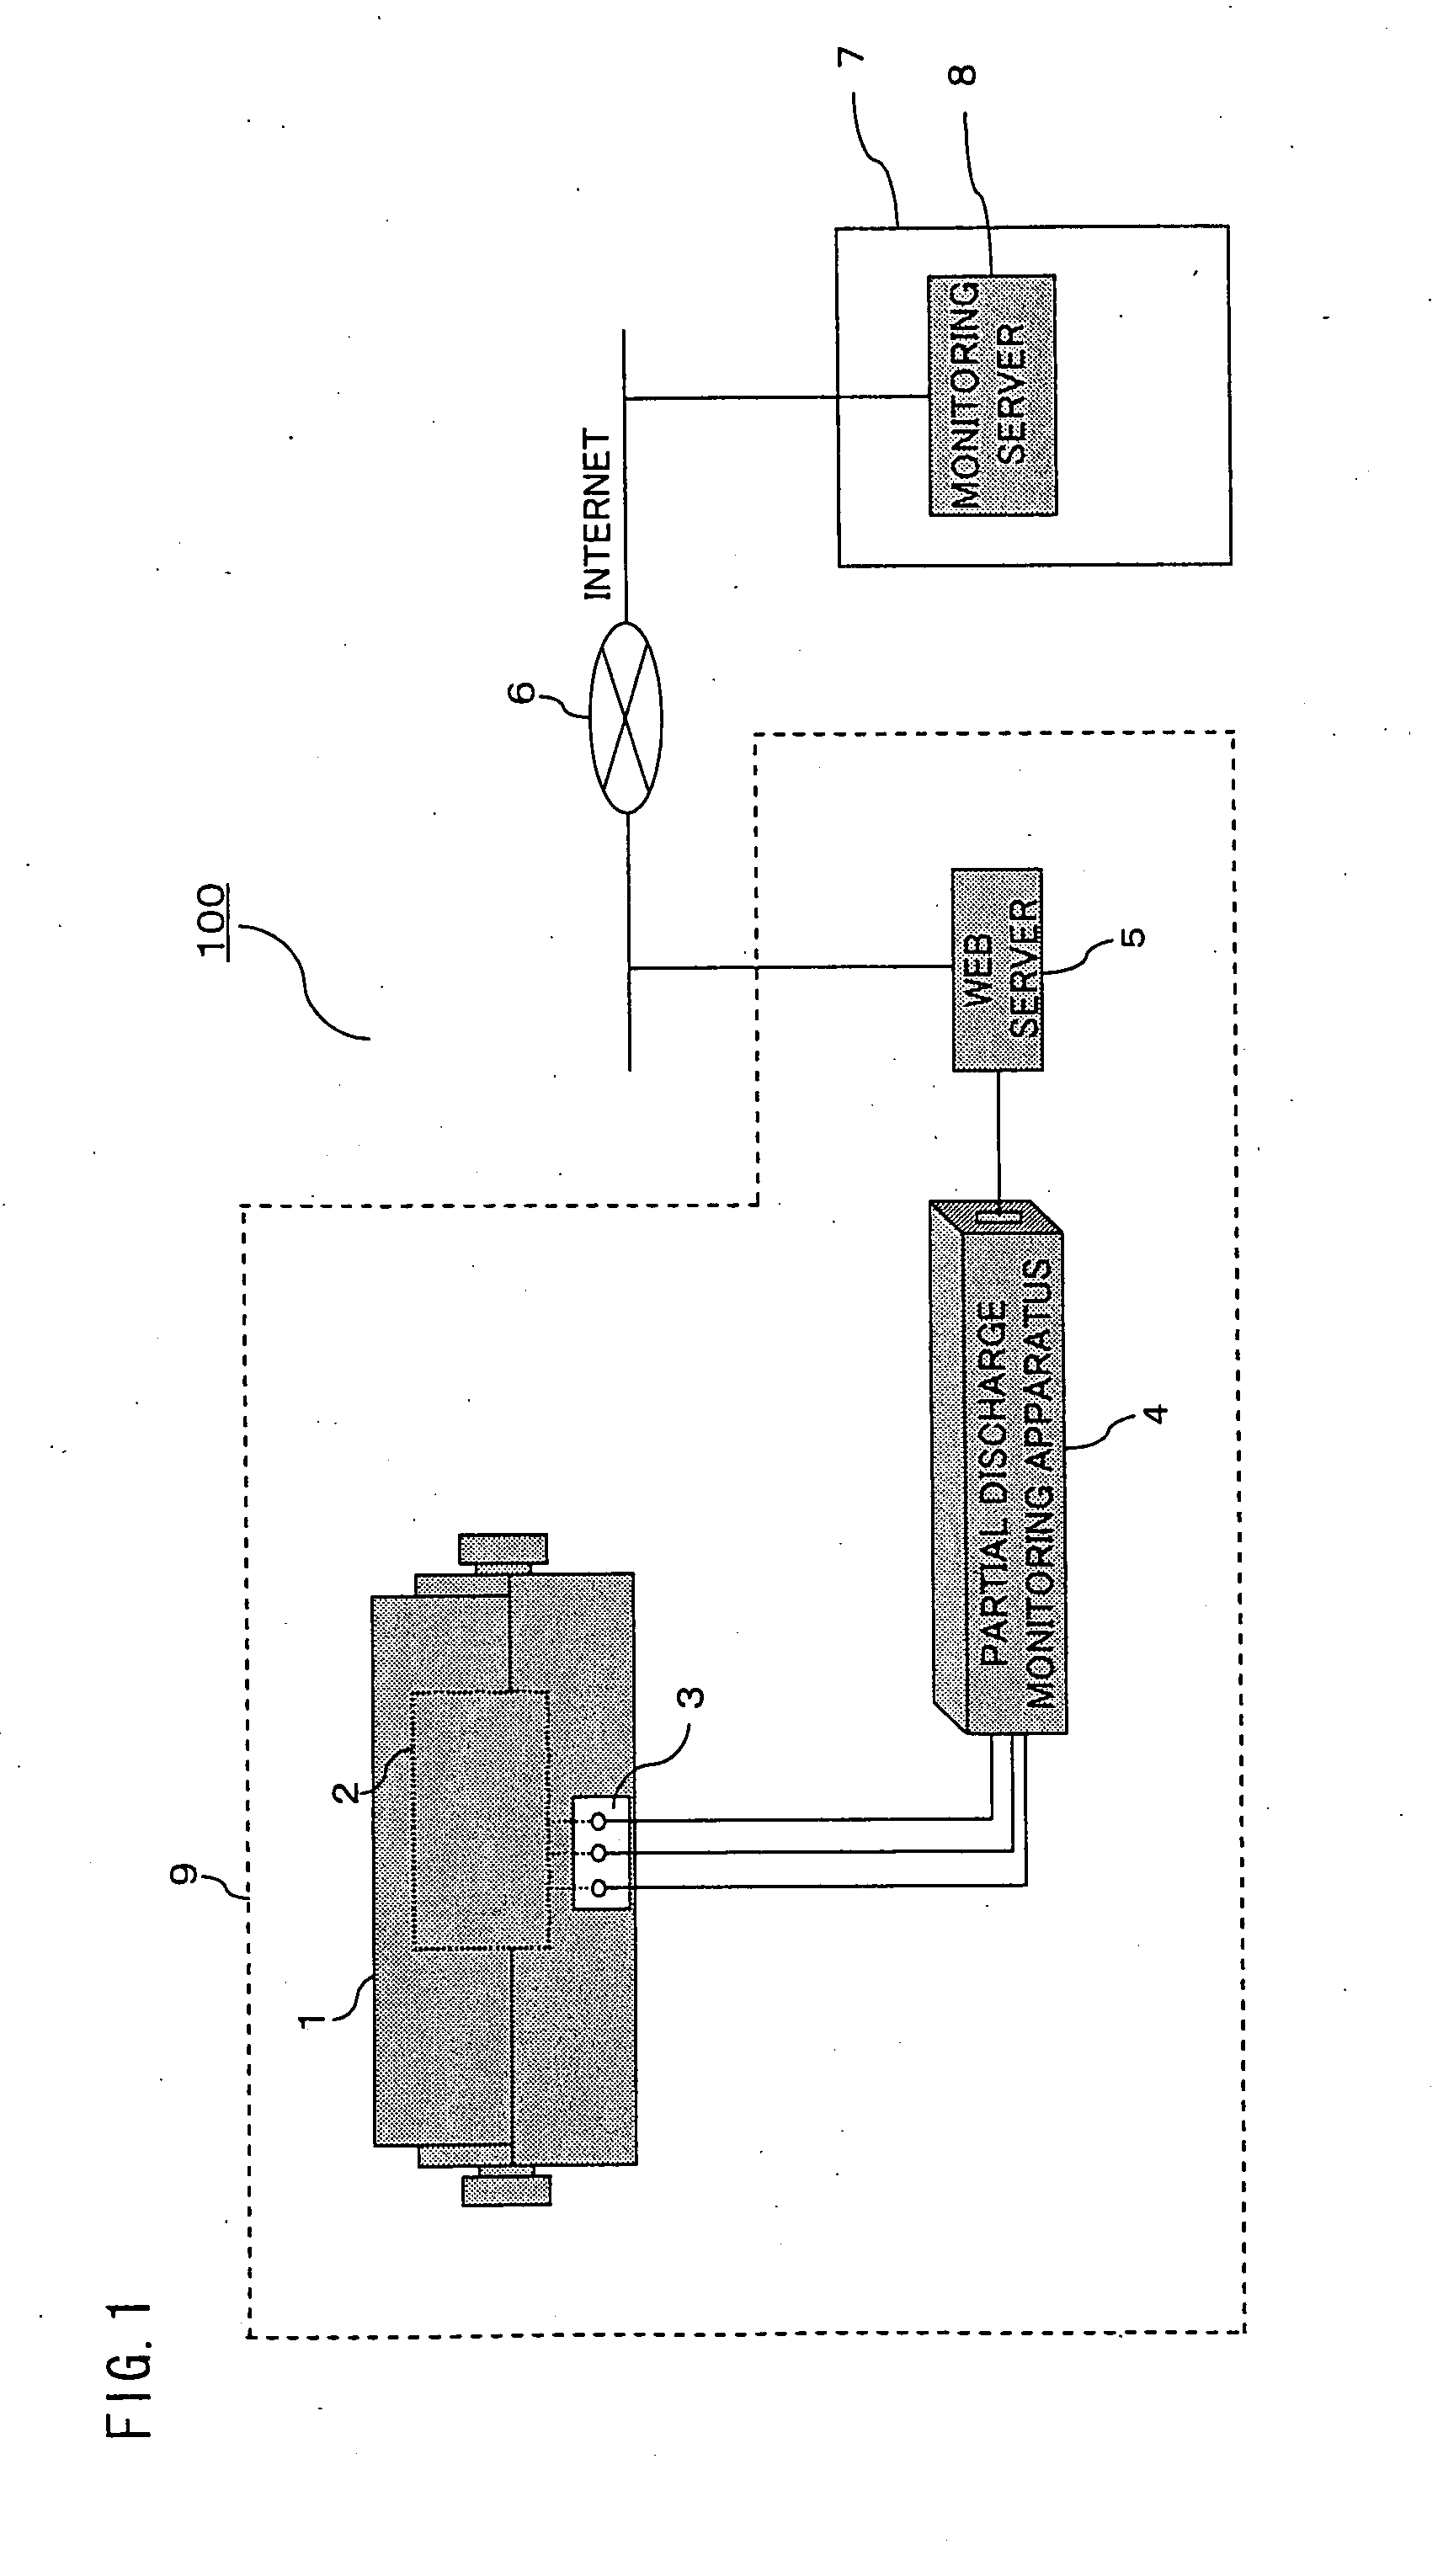 Partial discharge monitoring apparatus and partial discharge remote monitoring system for rotating electric machines